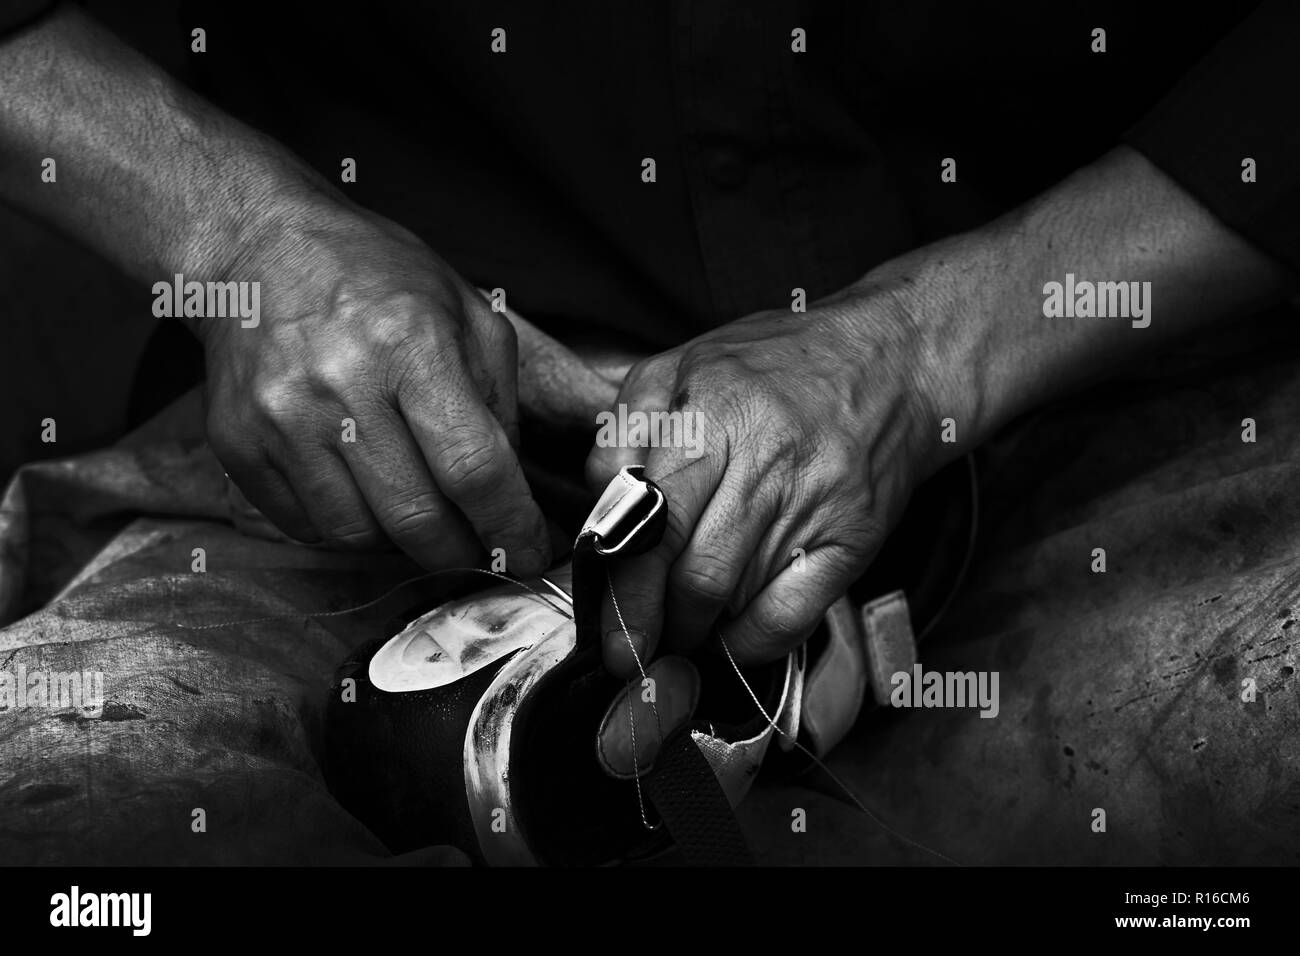 A man who repairing a shoe at the side of street on Tehran, capital of Iran. the black and white photo with contrast of a shoe maker with strong hand. Stock Photo